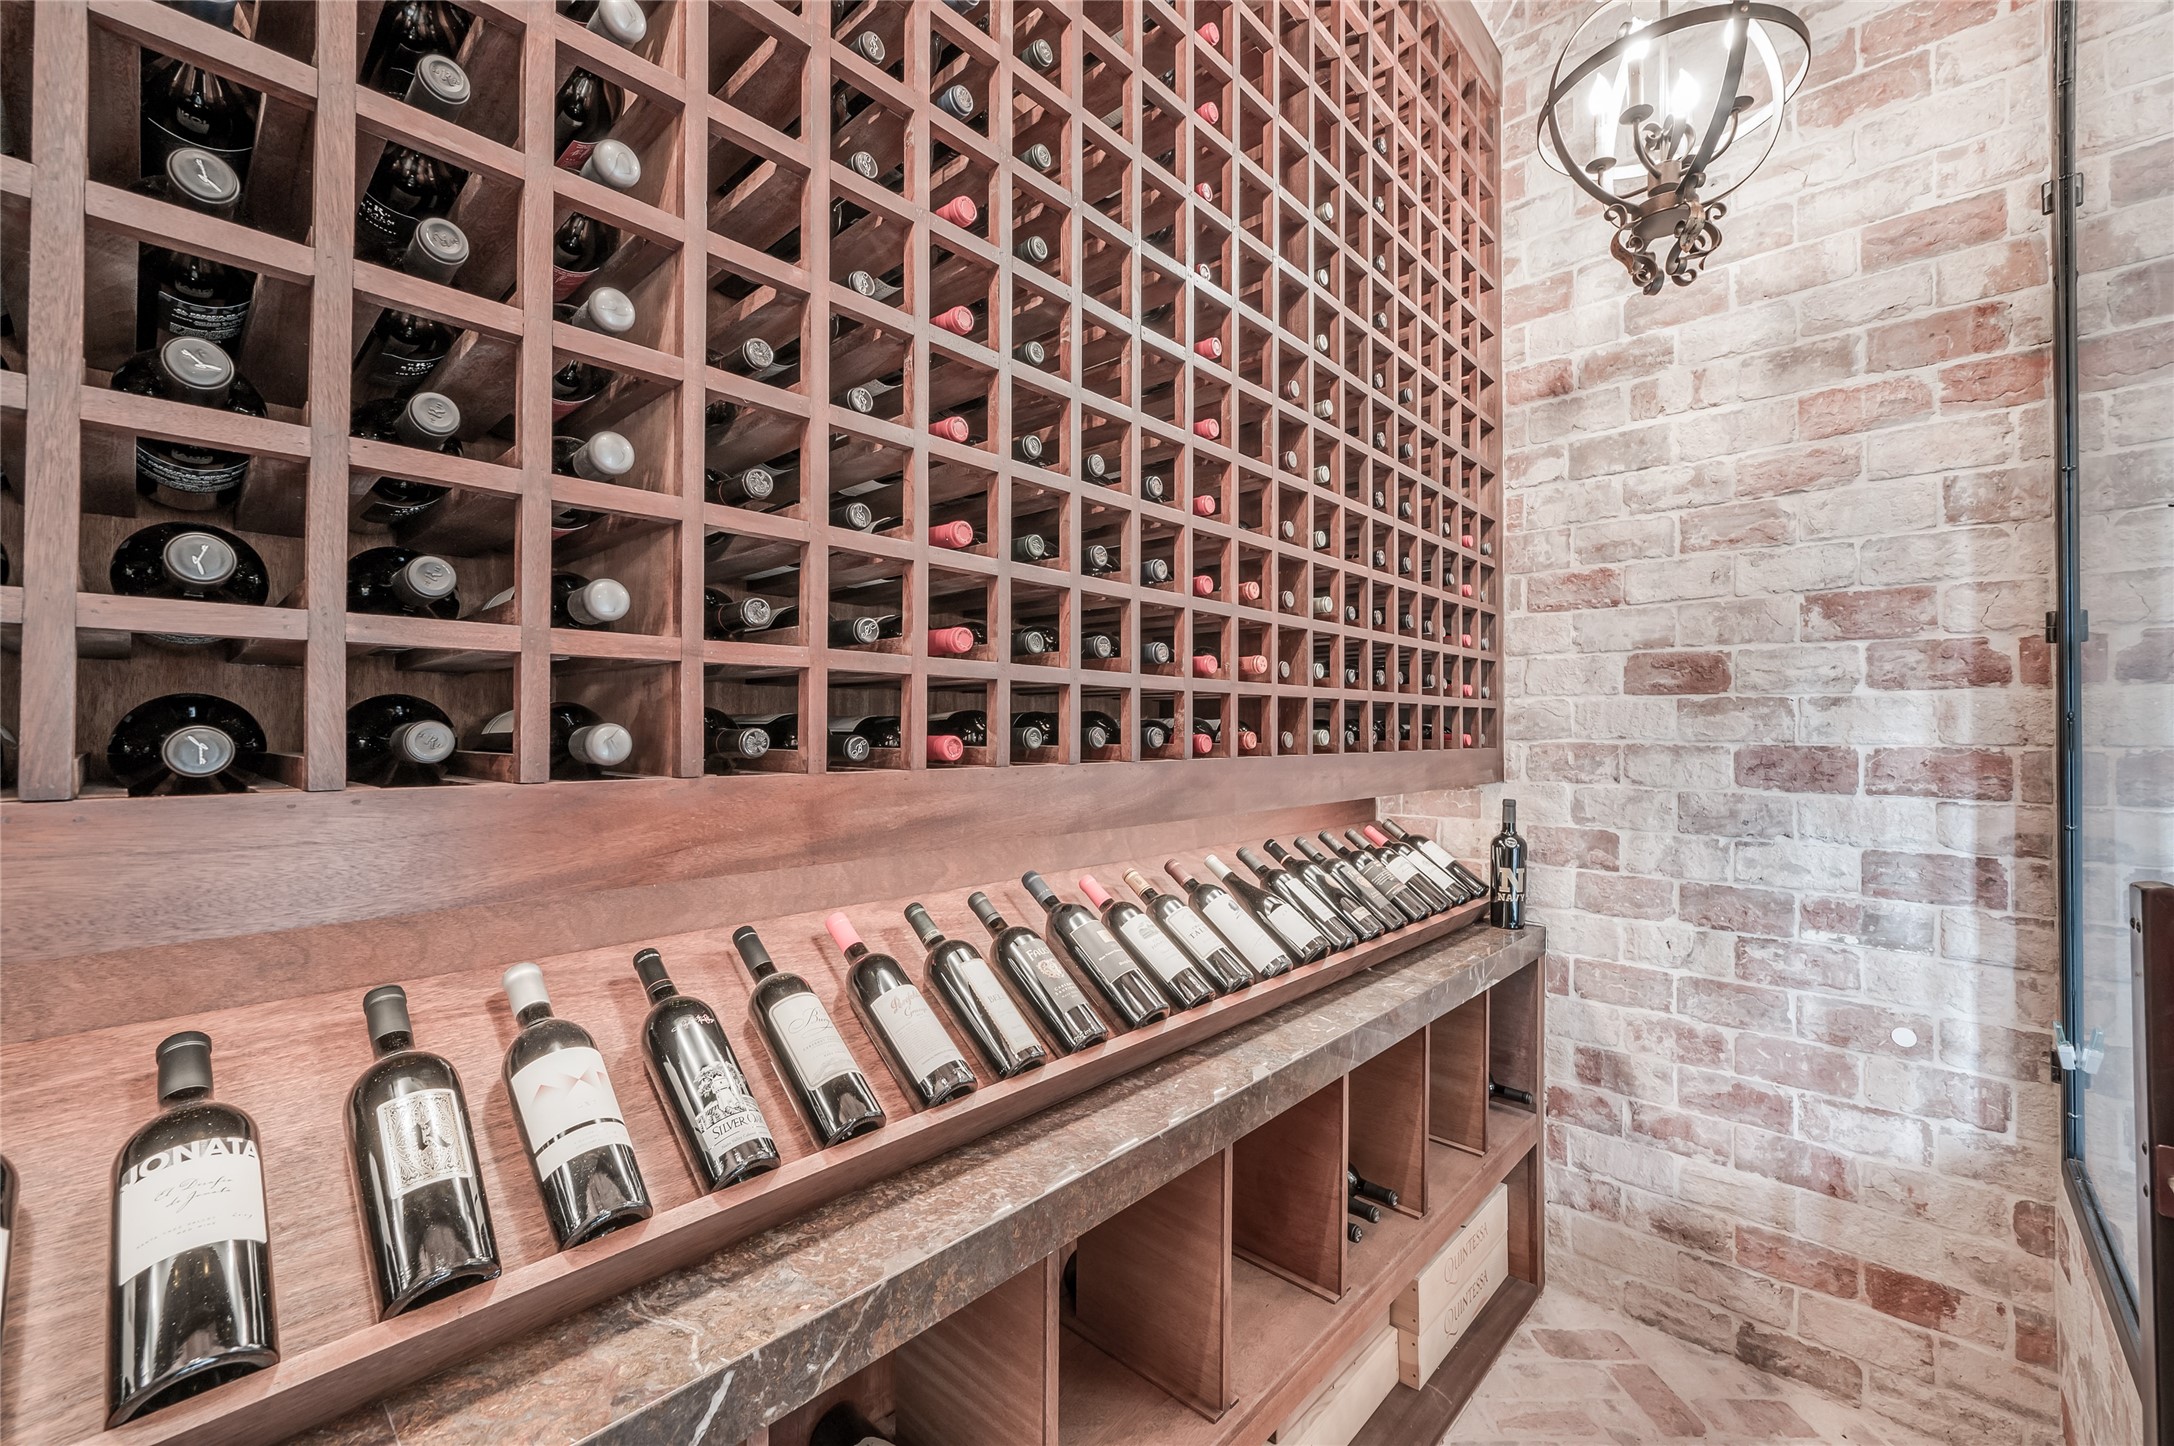 [Climate-Controlled Wine Vault]
Behind a glass and bronzed-steel door and arched window, the wine vault features a brick wall and floor, and storage for approximately 700 bottles.